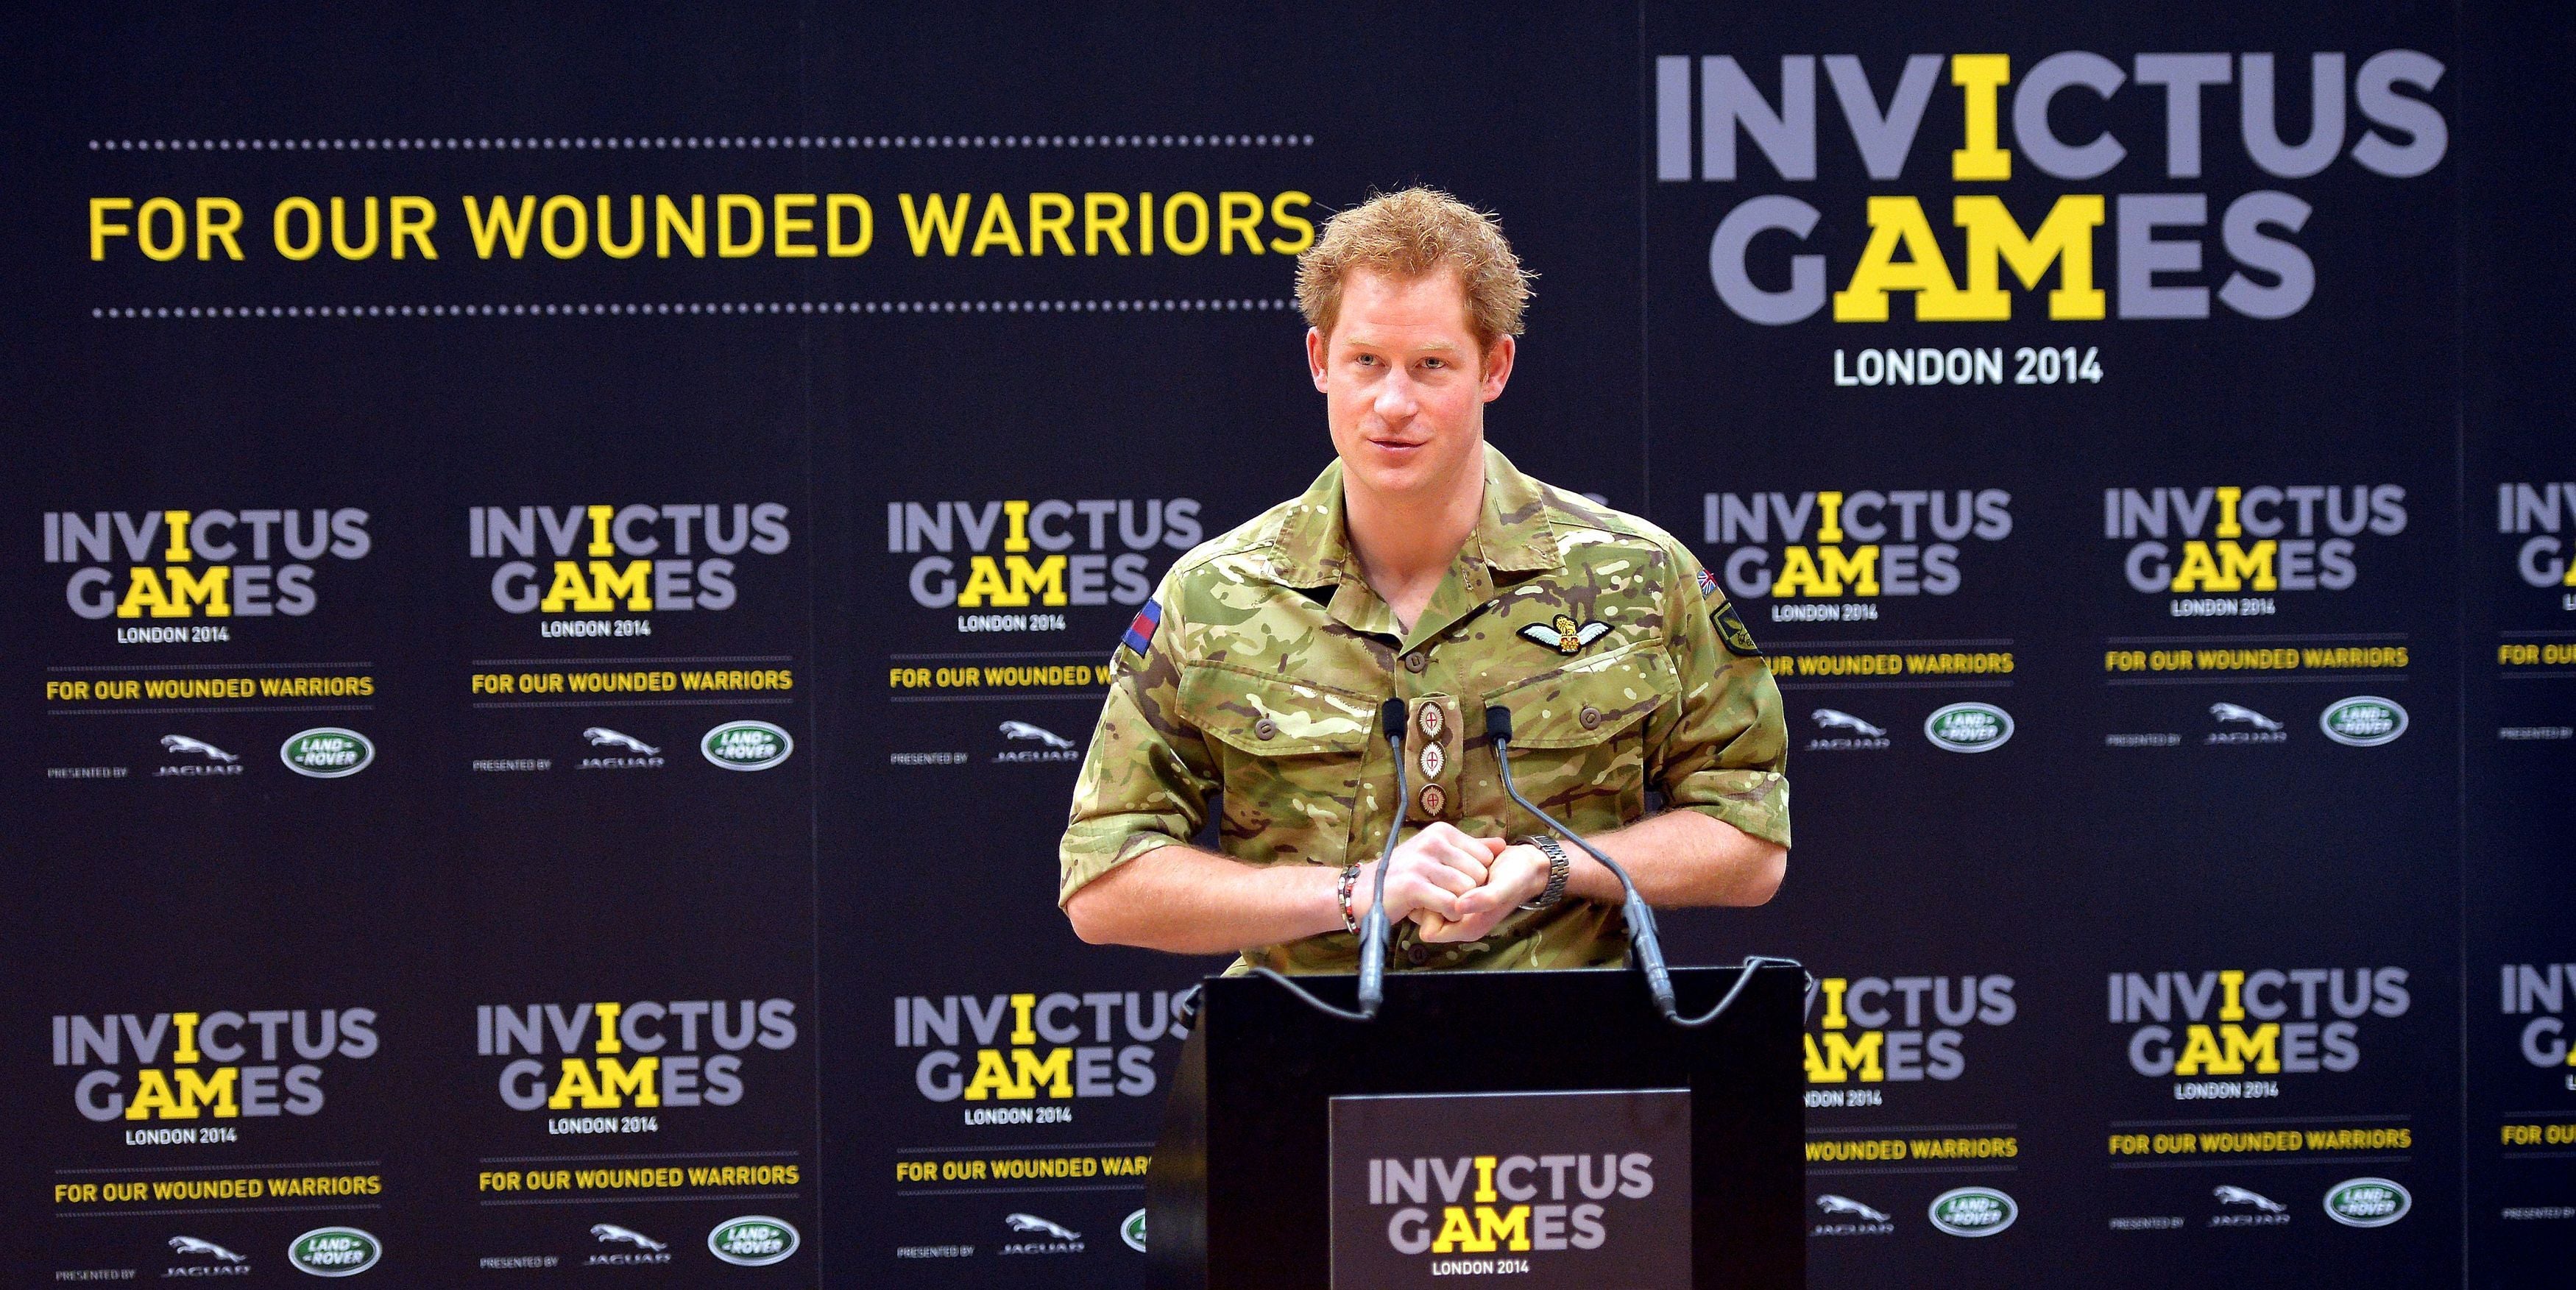 Harry launched the Invictus Games in 2014 (John Stillwell/PA)